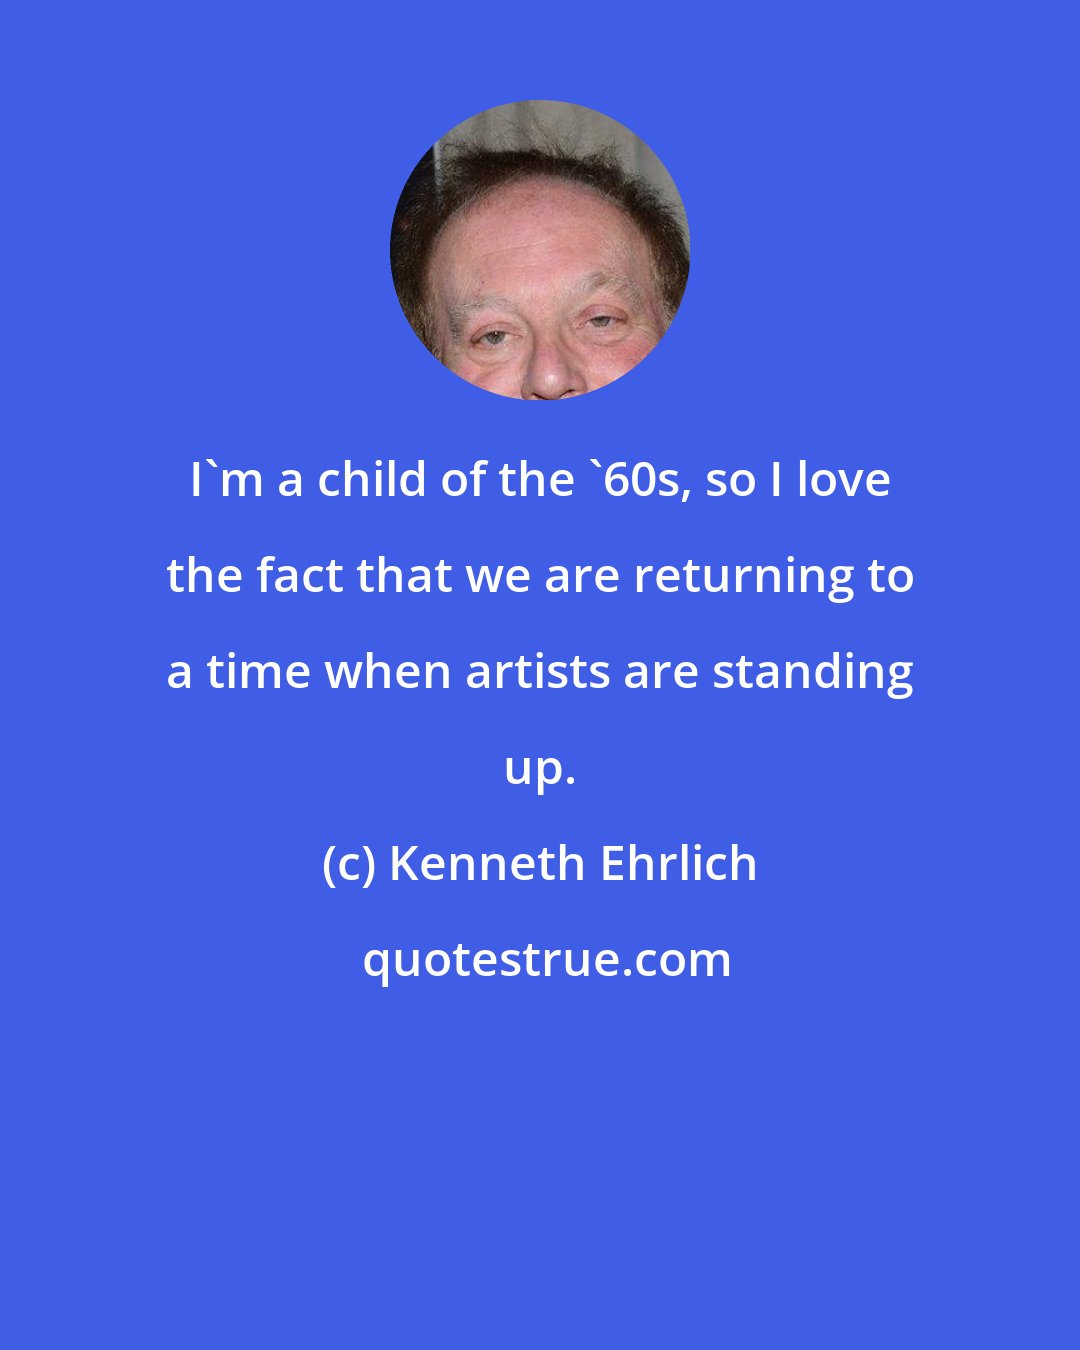 Kenneth Ehrlich: I'm a child of the '60s, so I love the fact that we are returning to a time when artists are standing up.